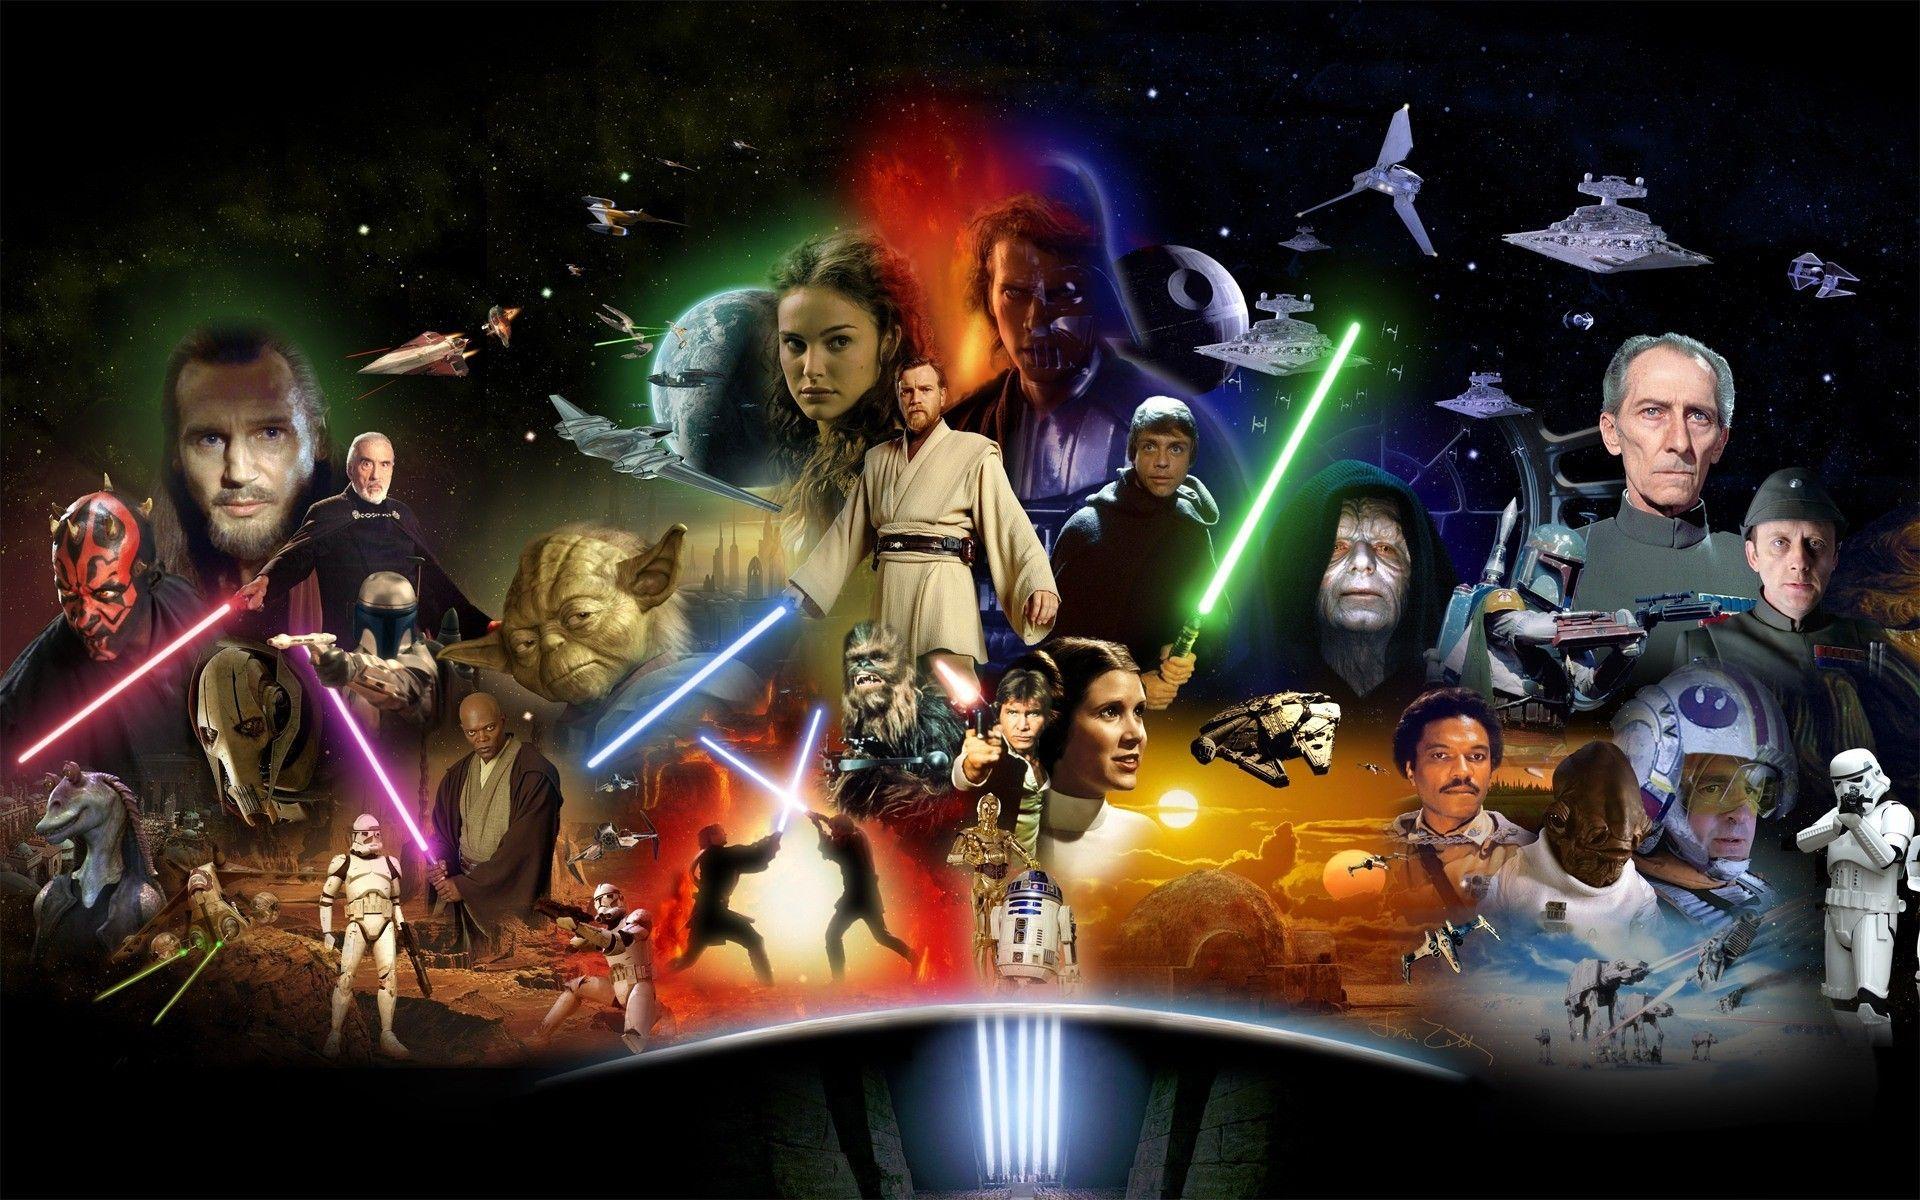 Best Colleges for “Star Wars” Characters